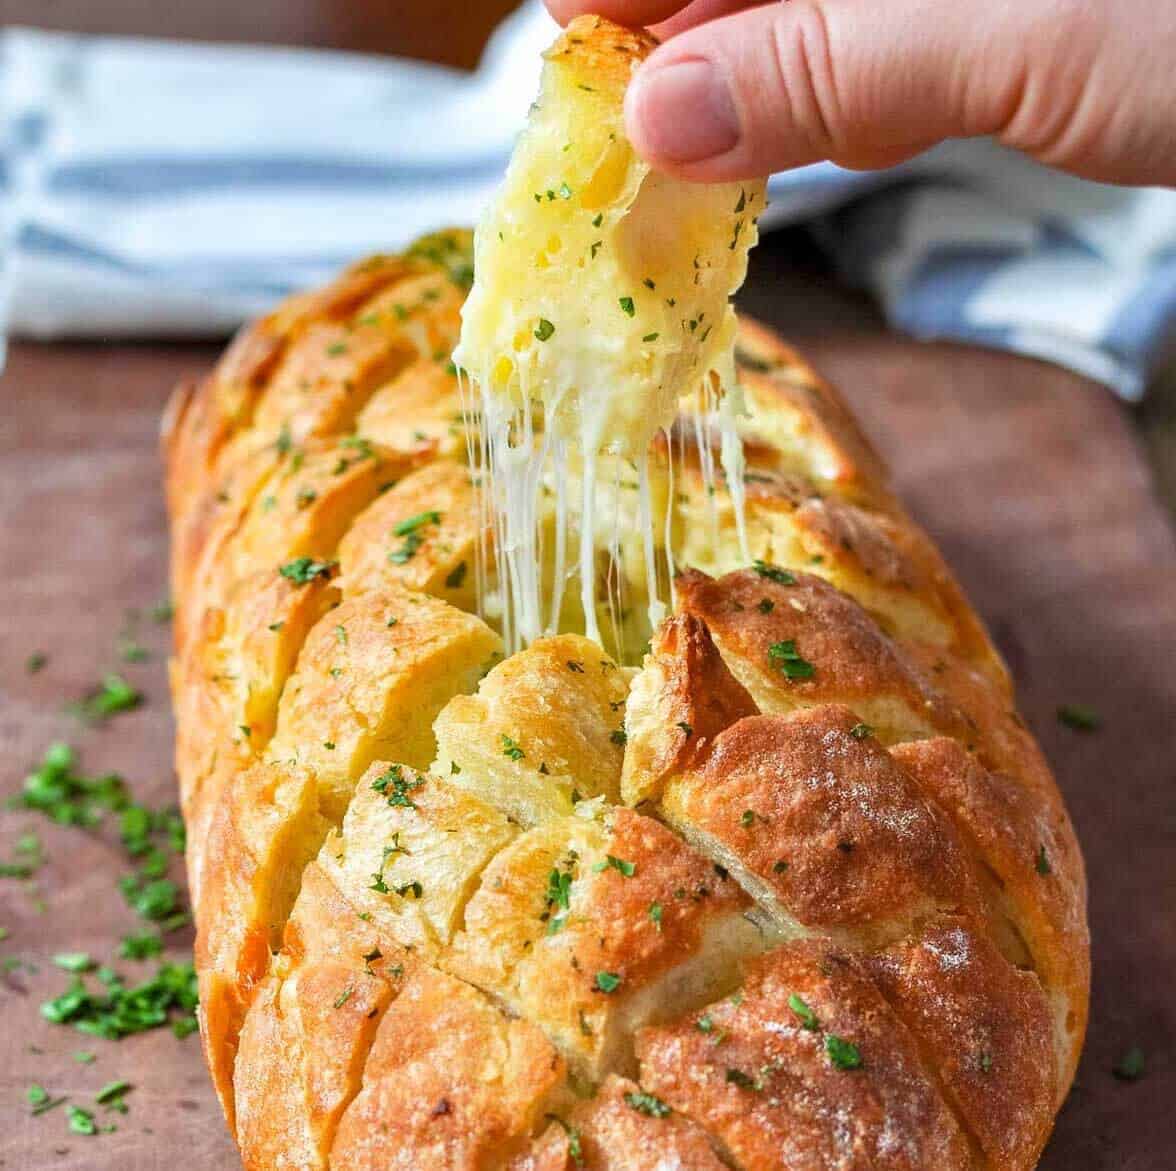 Cheese and Garlic Crack Bread (Pull Apart Bread) from https://www.recipetineats.com/